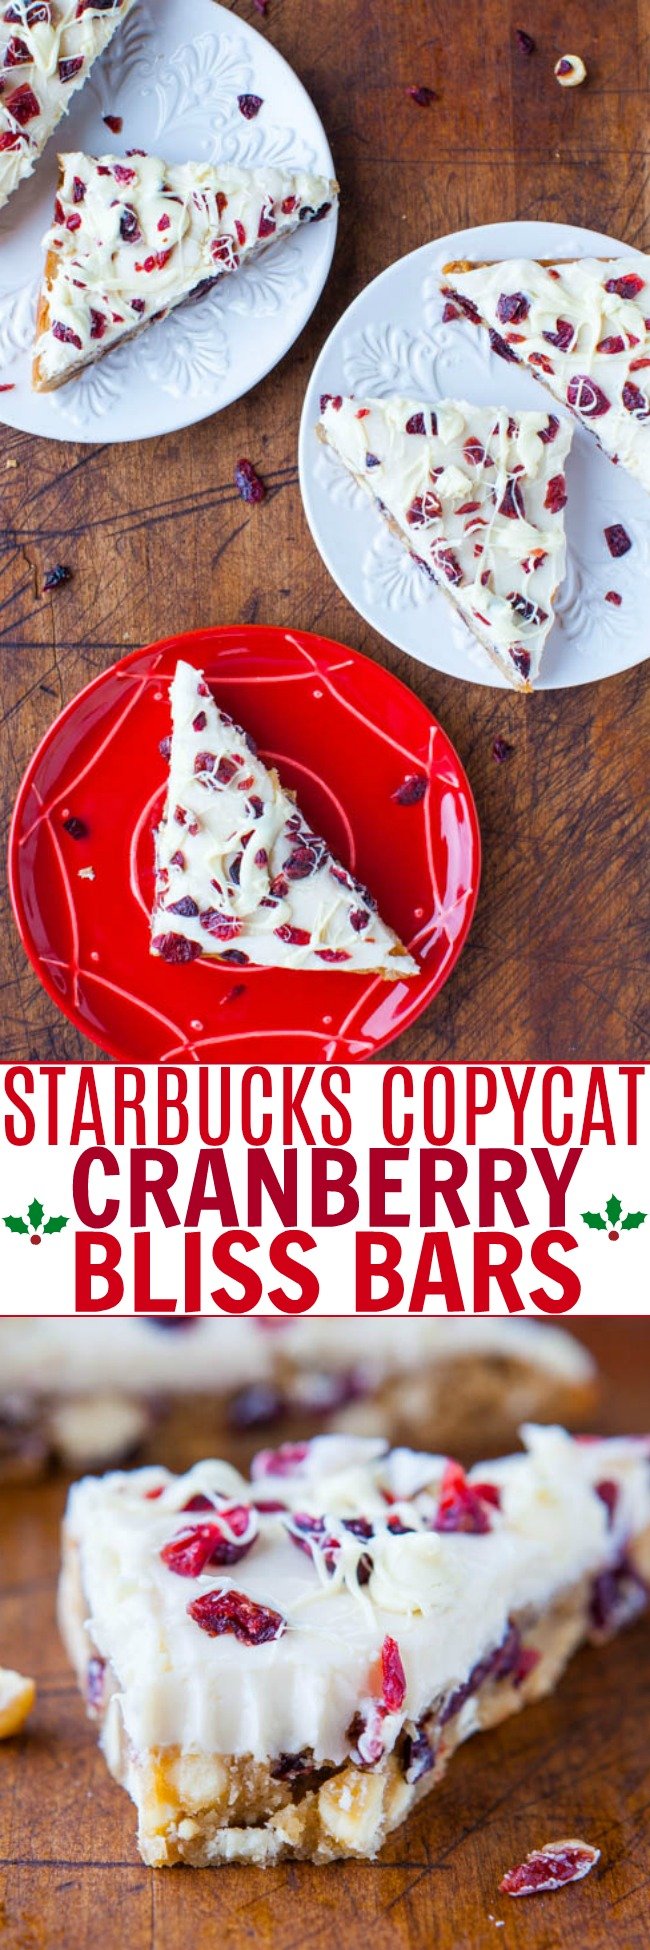 Copycat Starbucks Cranberry Bliss Bars — For anyone who loves the Starbucks version, these are can be made year-round at home for pennies on the dollar and taste every bit as fabulous and then some!! I like to call them Better-Than-Starbucks Cranberry Bliss Bars!!